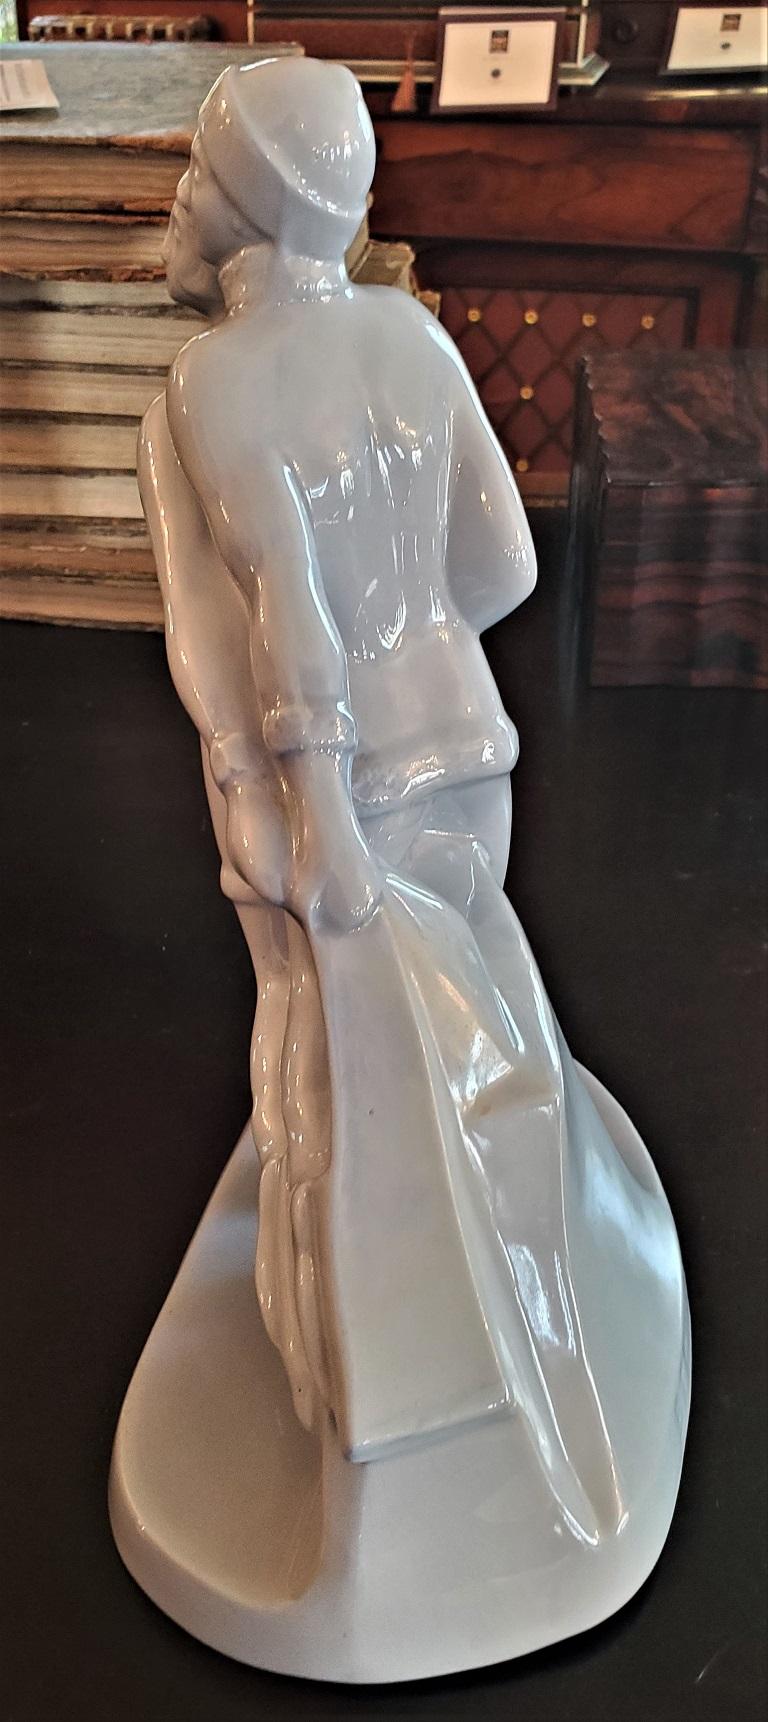 Belgian Art Deco Charles Catteau BFK Ice Skater Sculpture In Excellent Condition For Sale In Dallas, TX